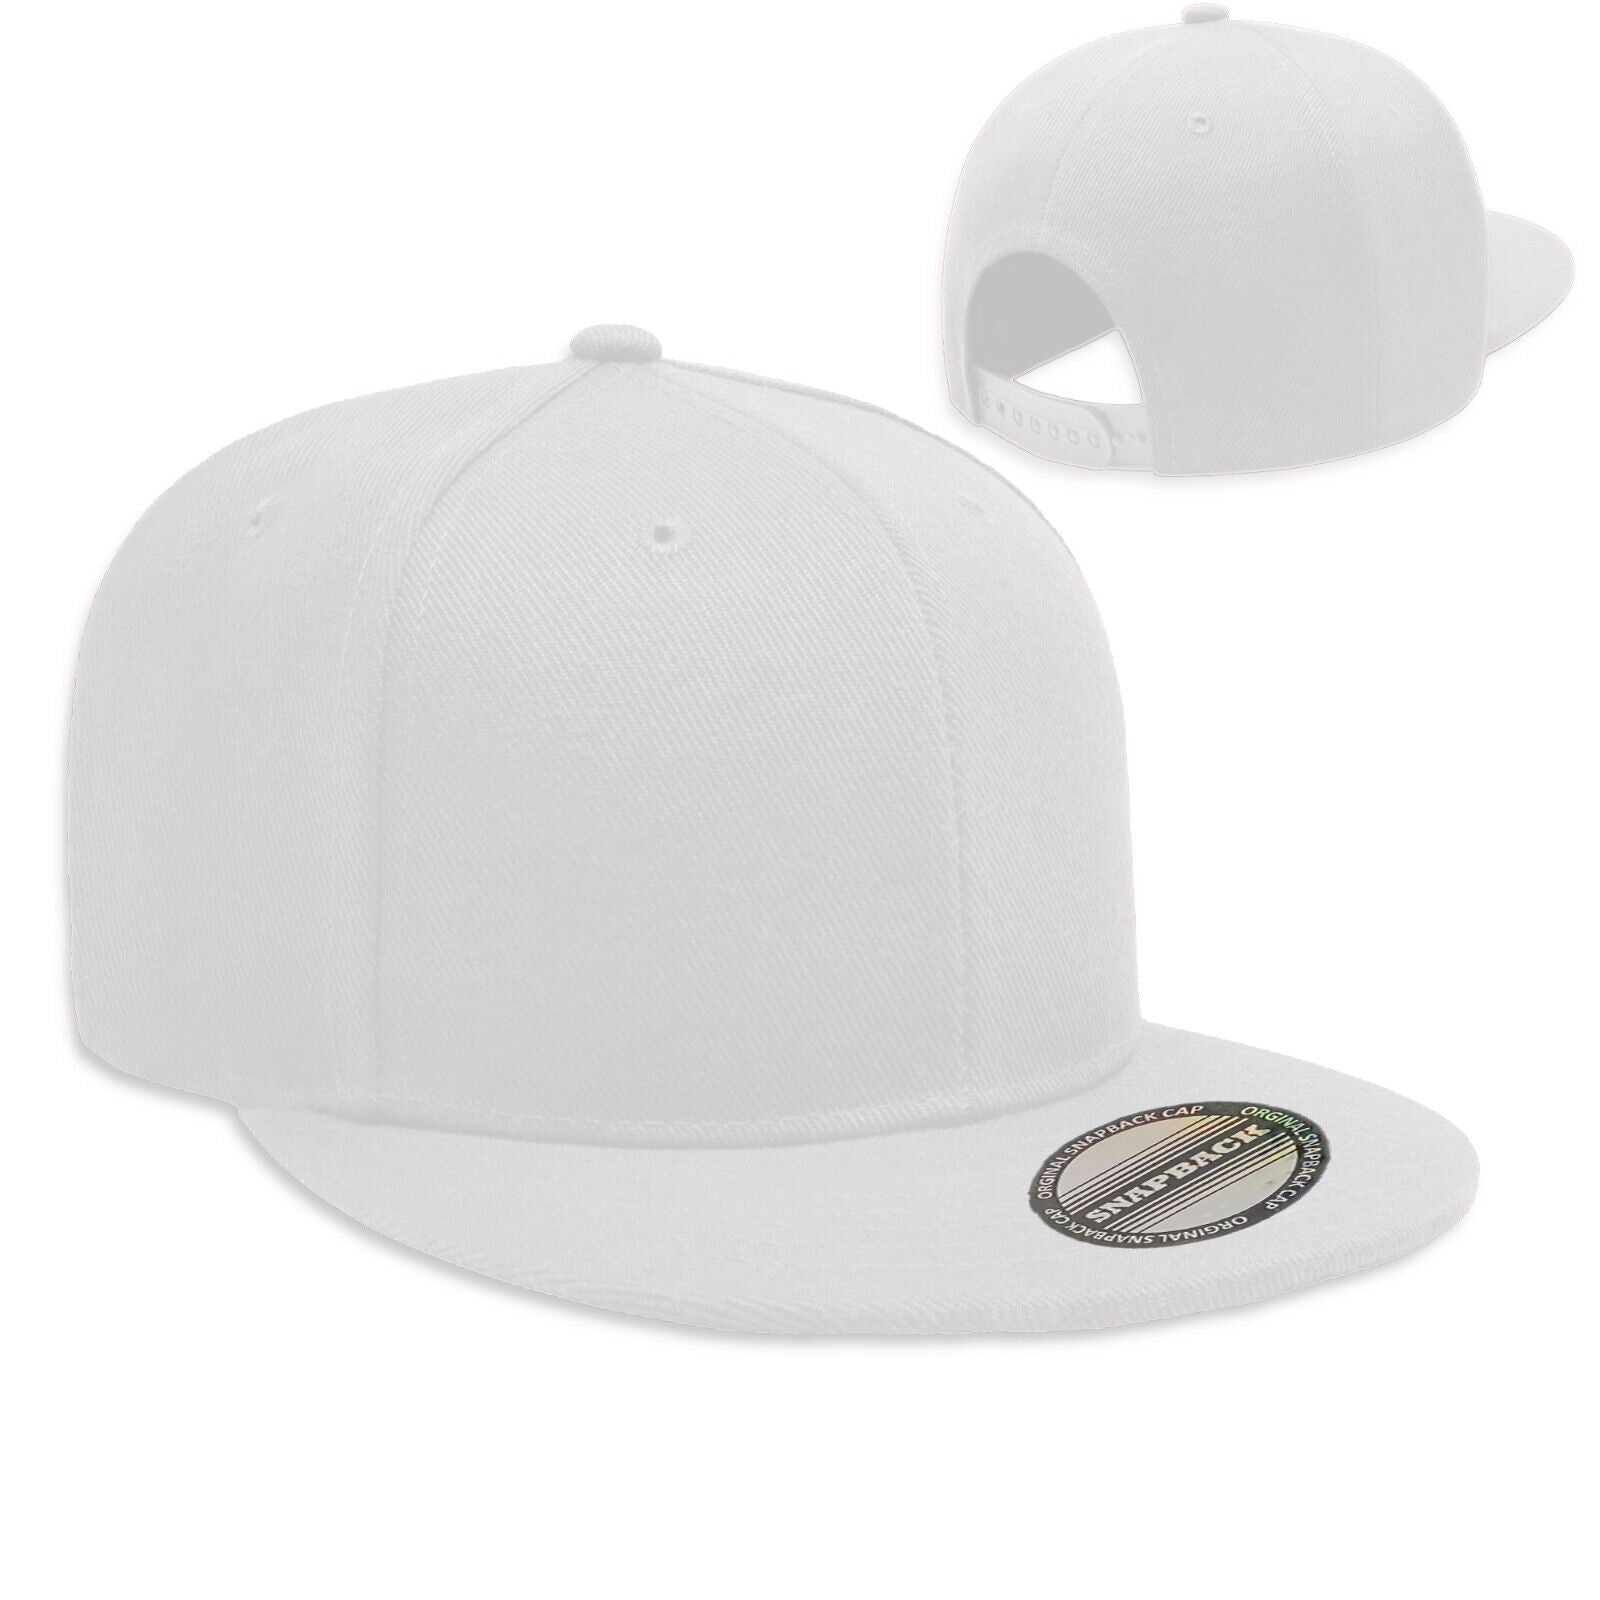 Classic Snapback Hat Cap Hip Hop Style Hat for Youth Men Baseball Cap Flat Brim Blank Solid Color Adjustable Size